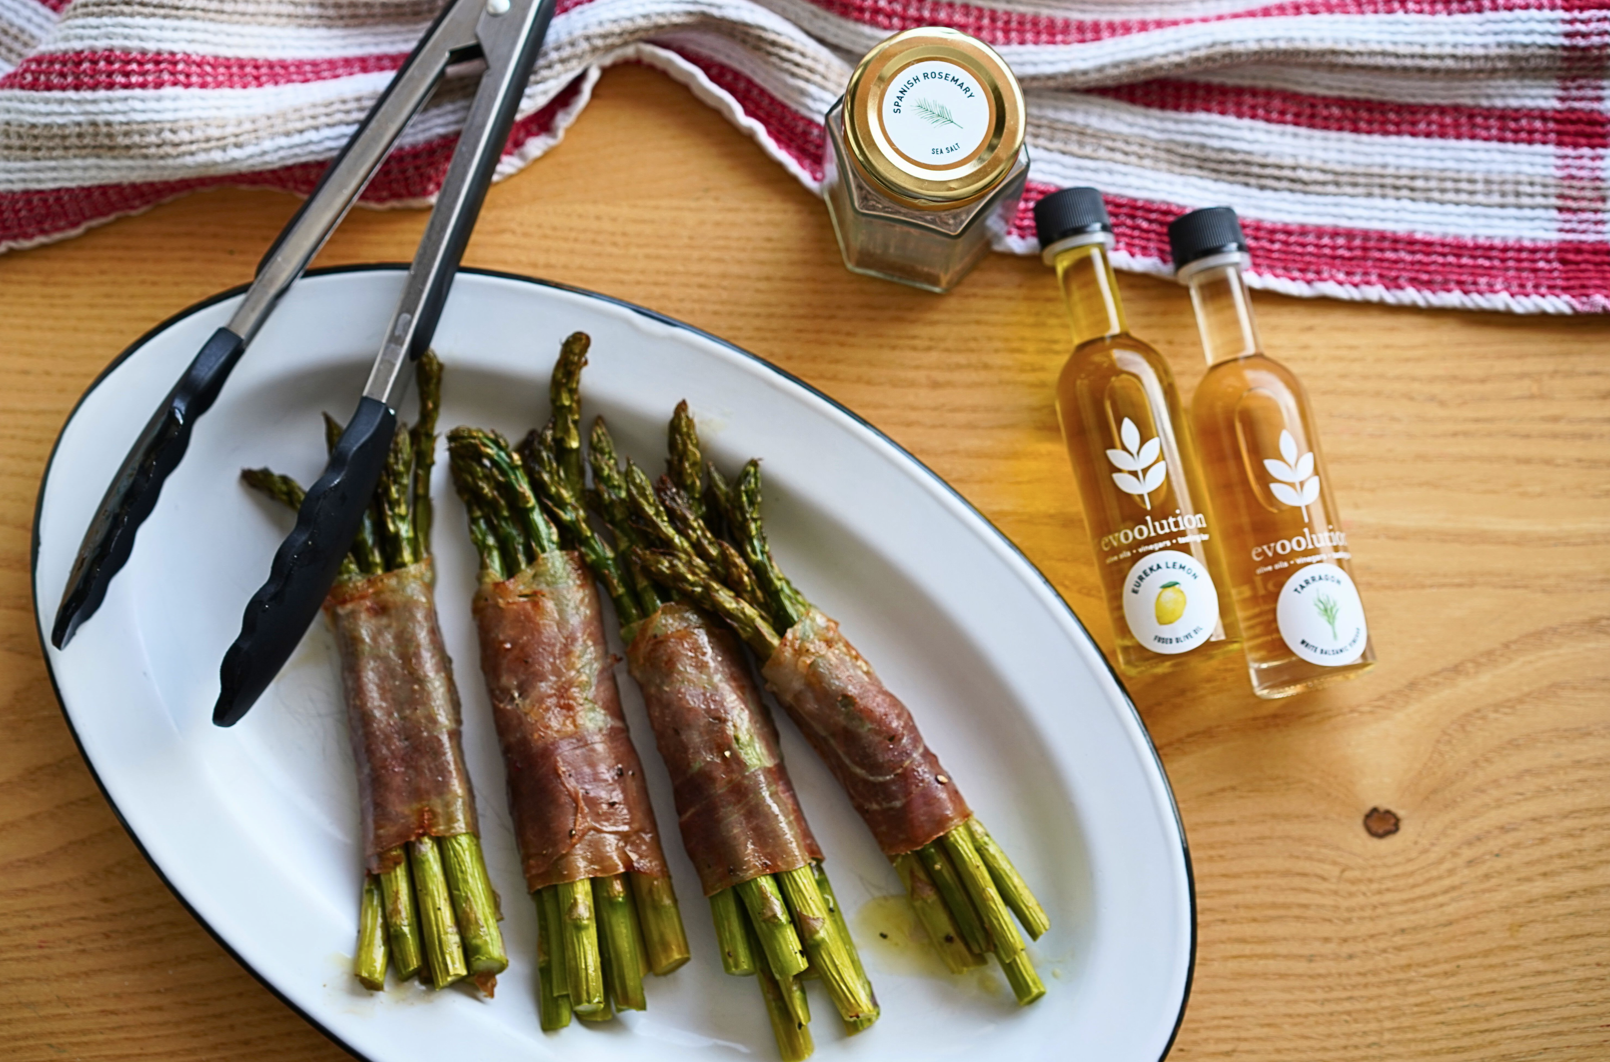 Image of Prosciutto Wrapped Asparagus Bundles with Eureka Lemon Olive Oil and Tarragon Balsamic